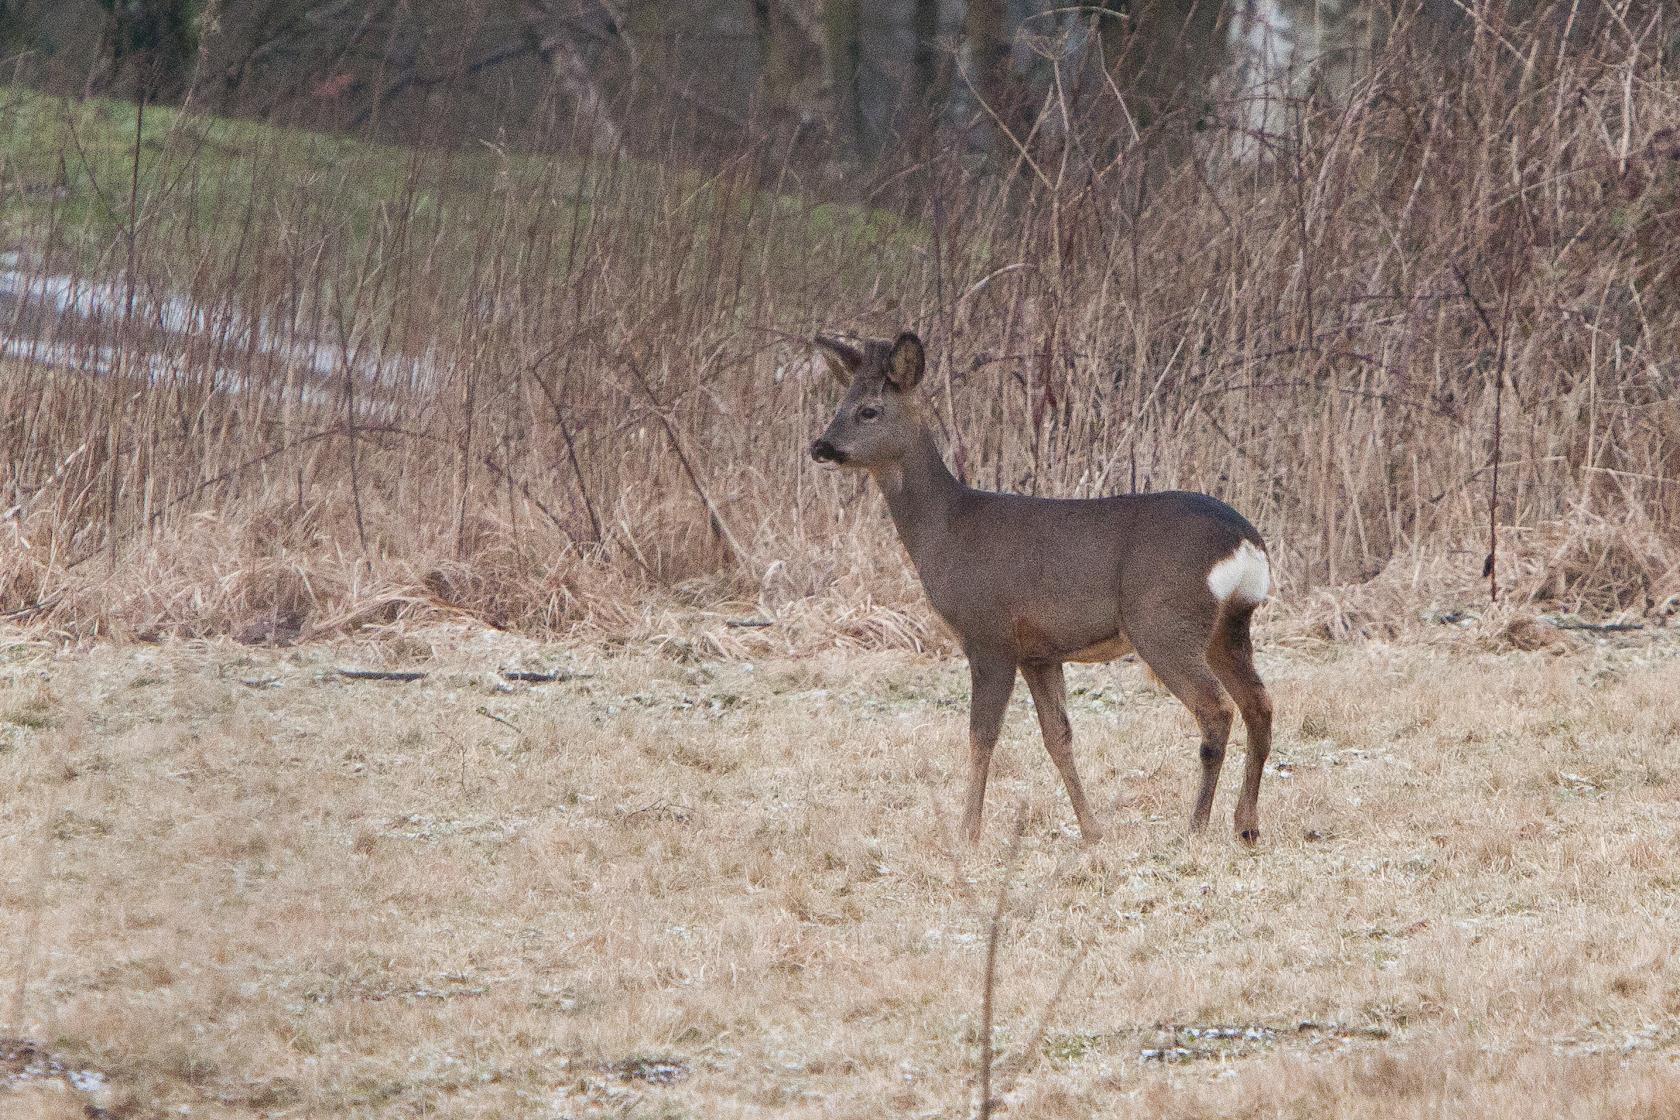 a large adult deer stands alone in the grass